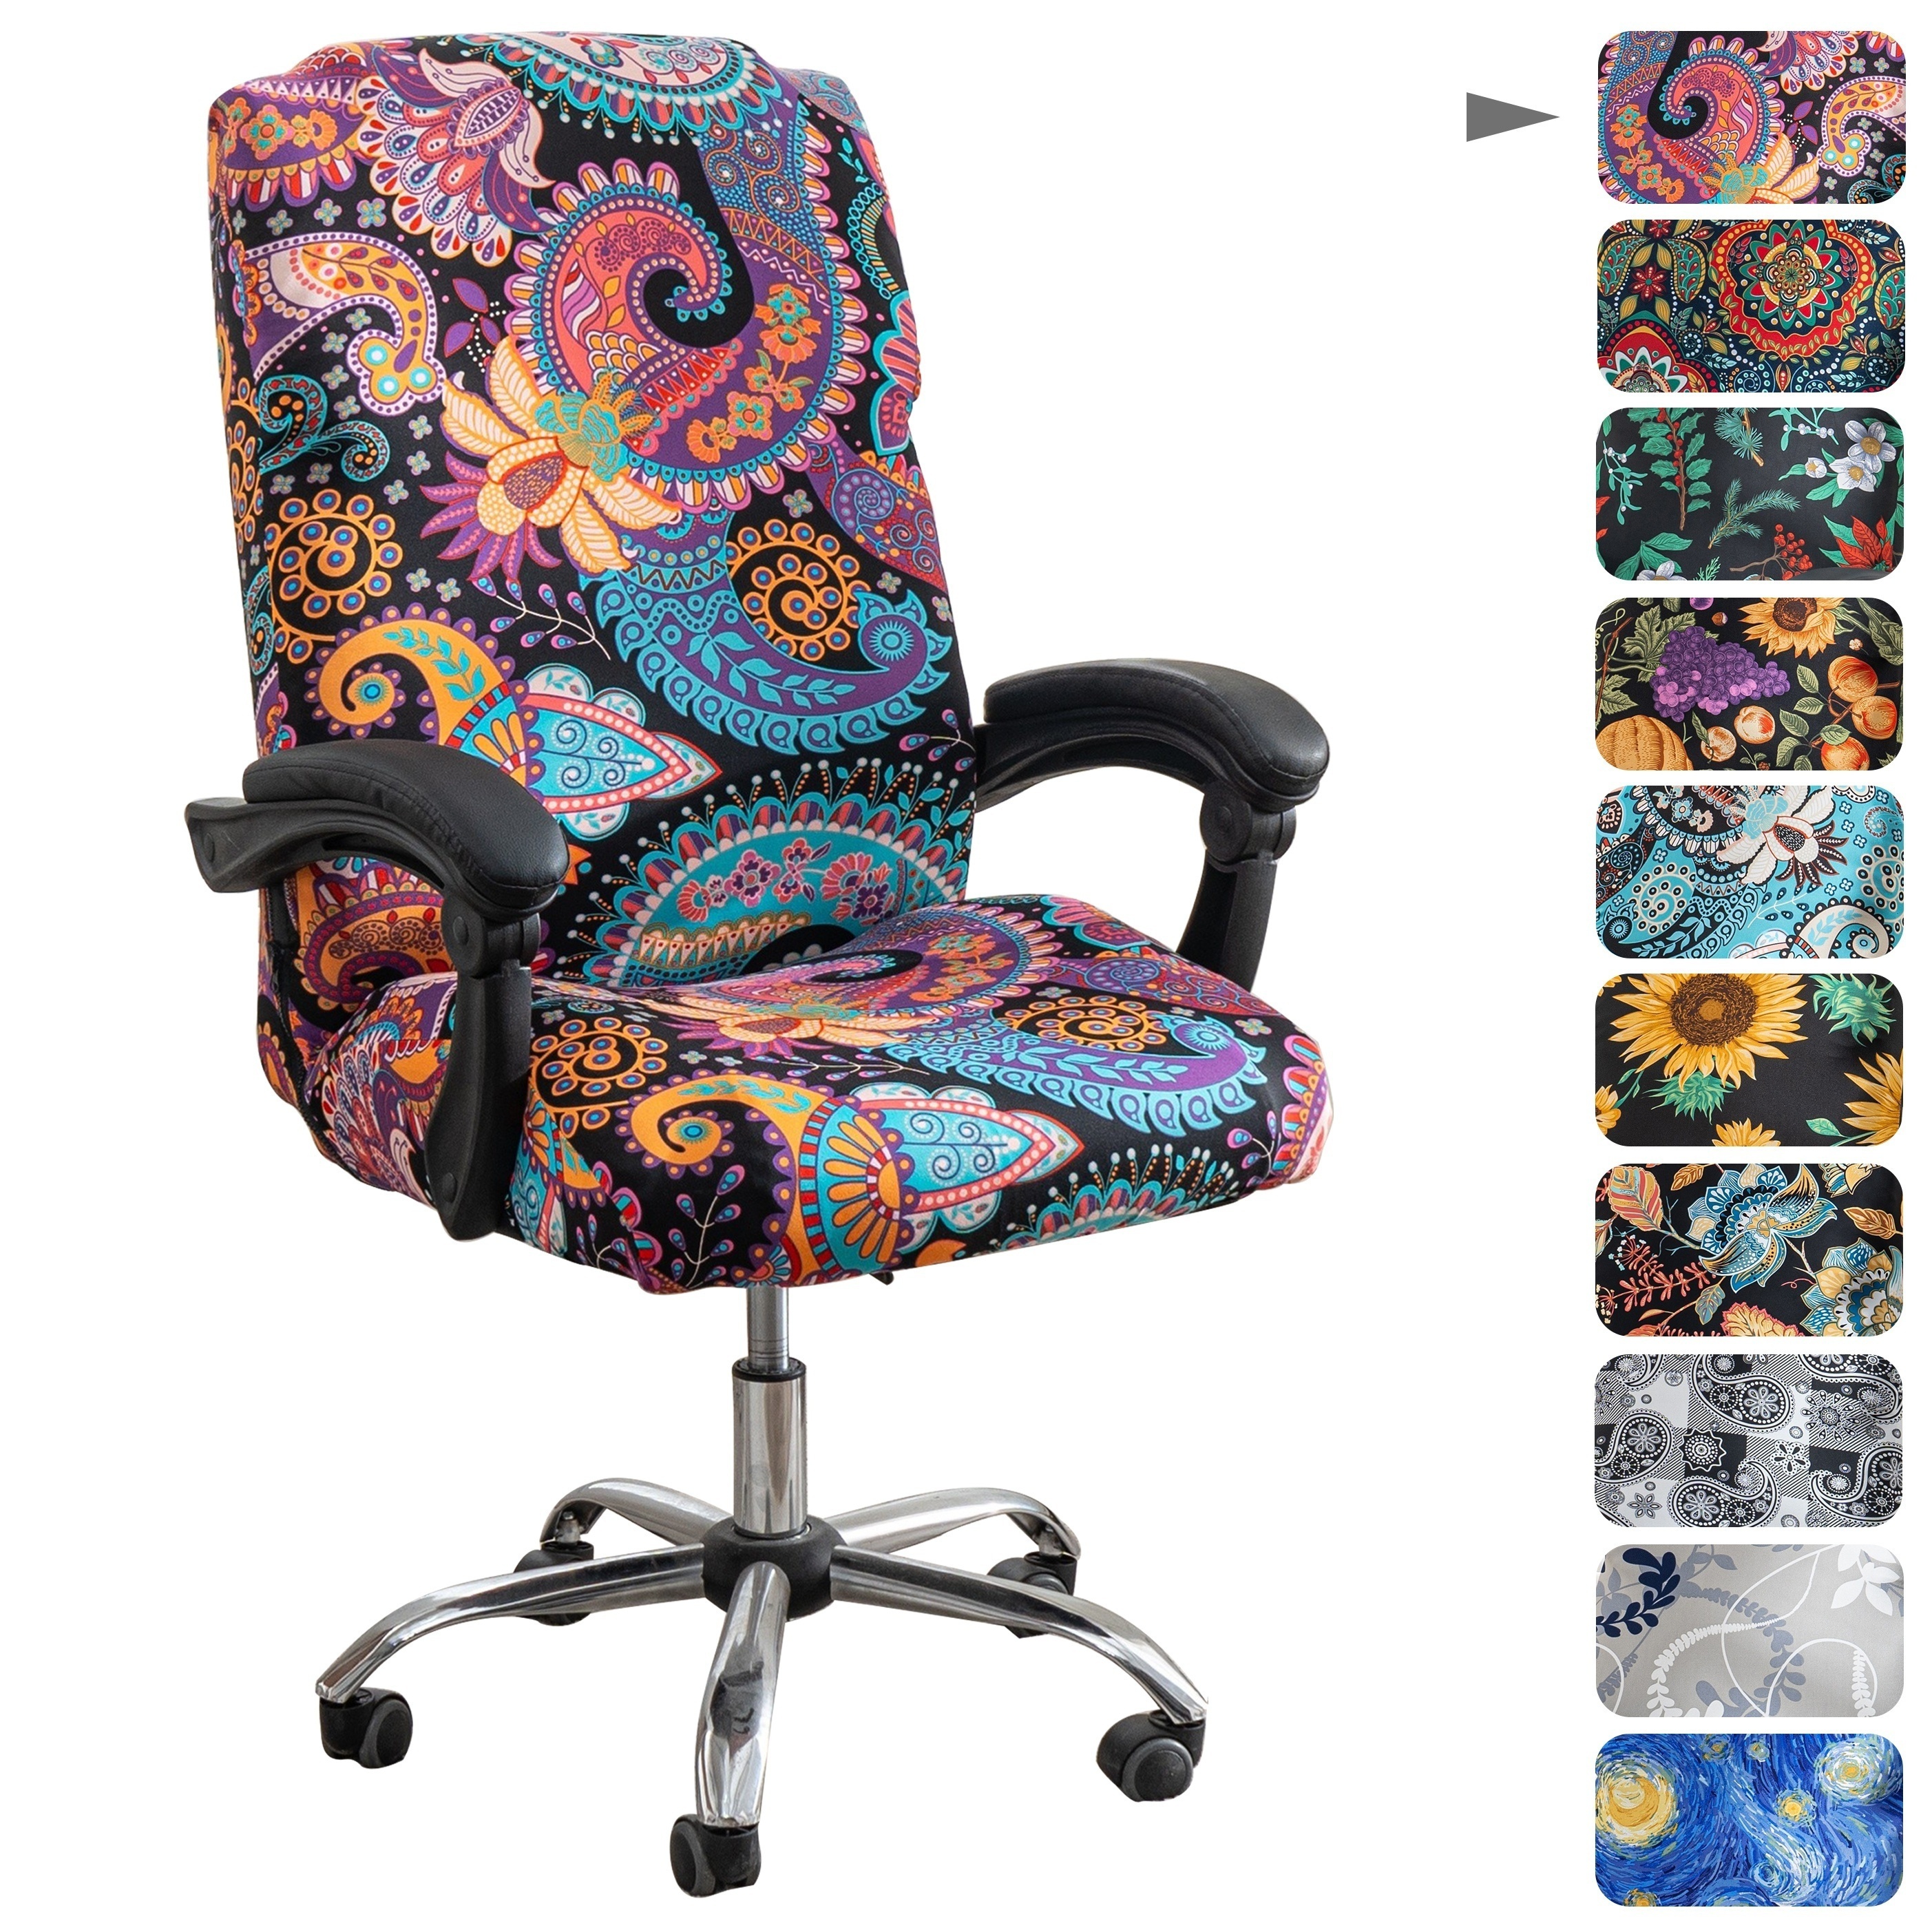 

1pc Stretch Printed Computer Office Chair Covers, Soft Fit Universal Desk Rotating Chair Slipcovers, Removable Washable Anti-dust Spandex Chair Protector Cover With Zipper